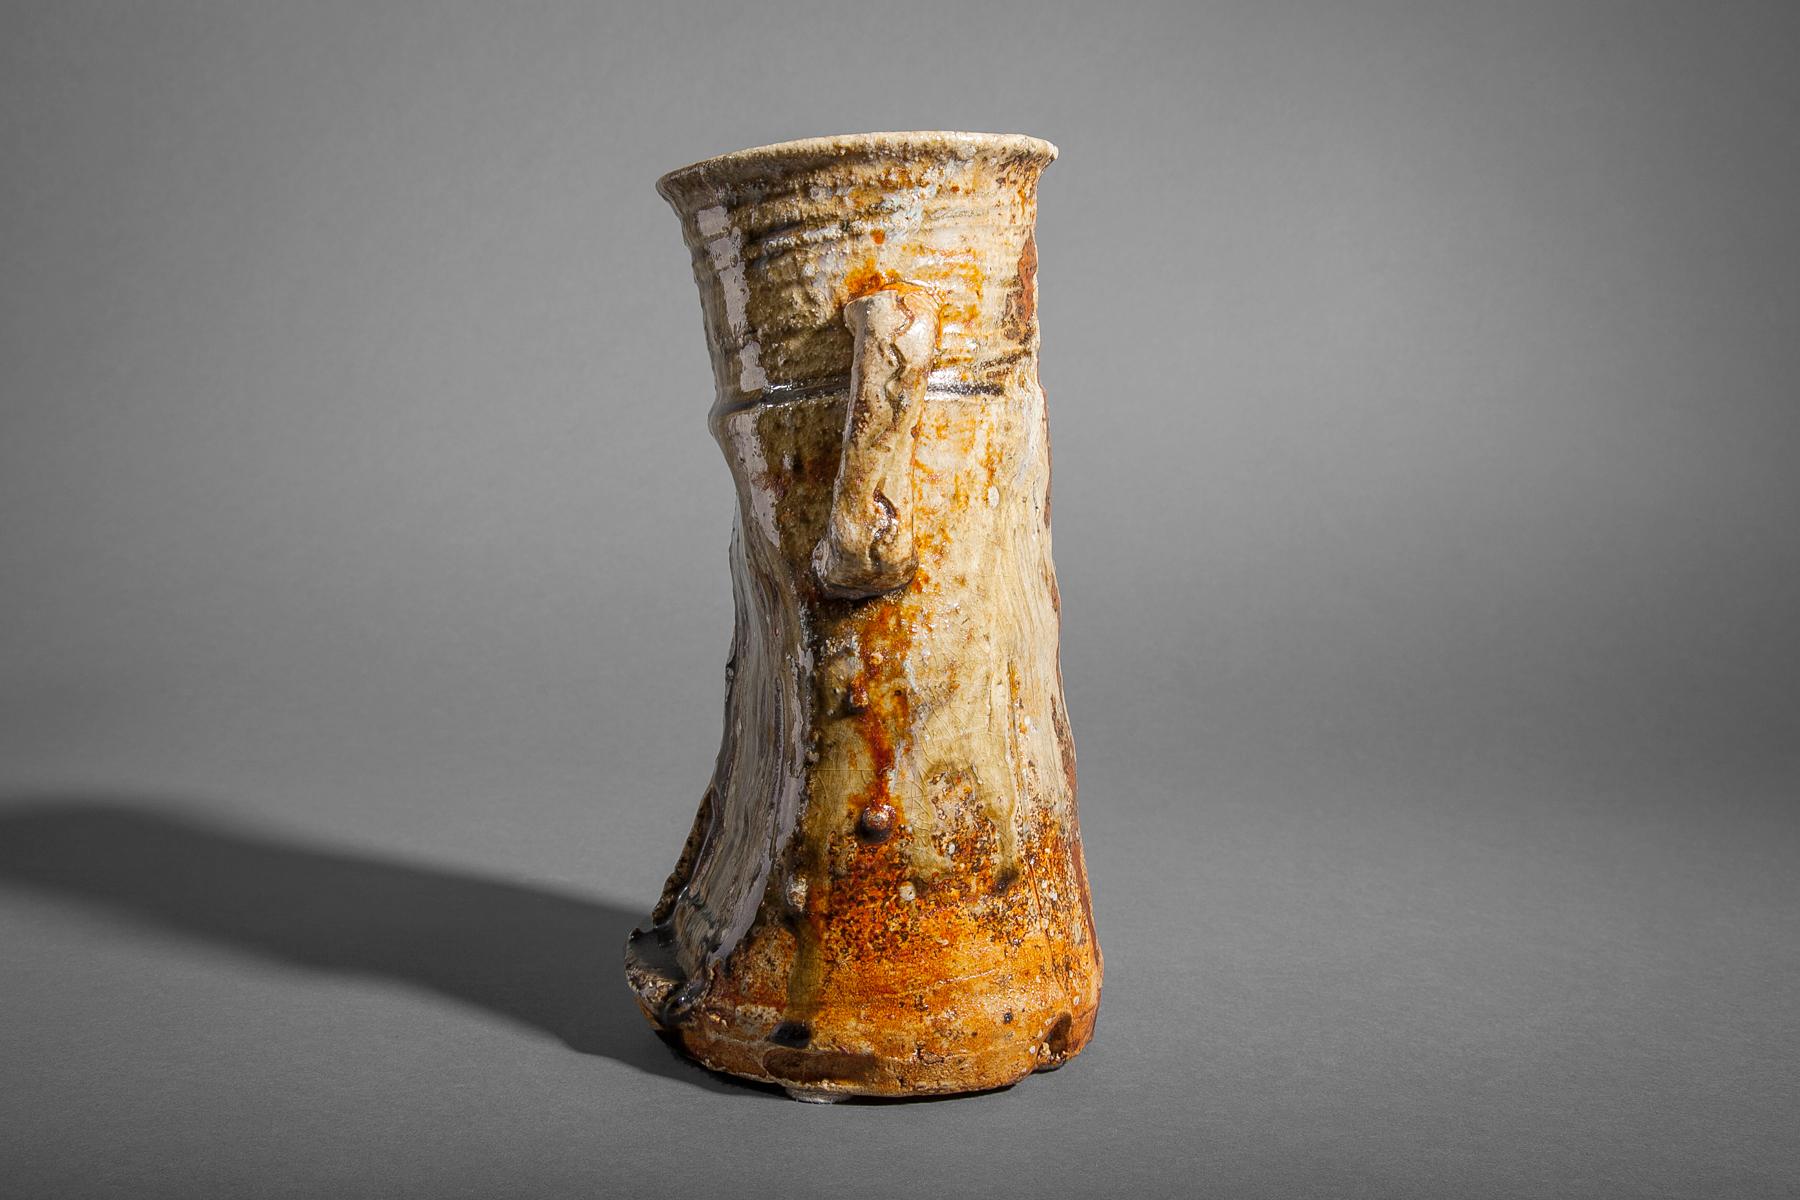 Meiji period (1868-1912) vase with characteristic Iga-ware ears and rough, sandy clay. Comes in original storage box with silk jacket and drawstring.